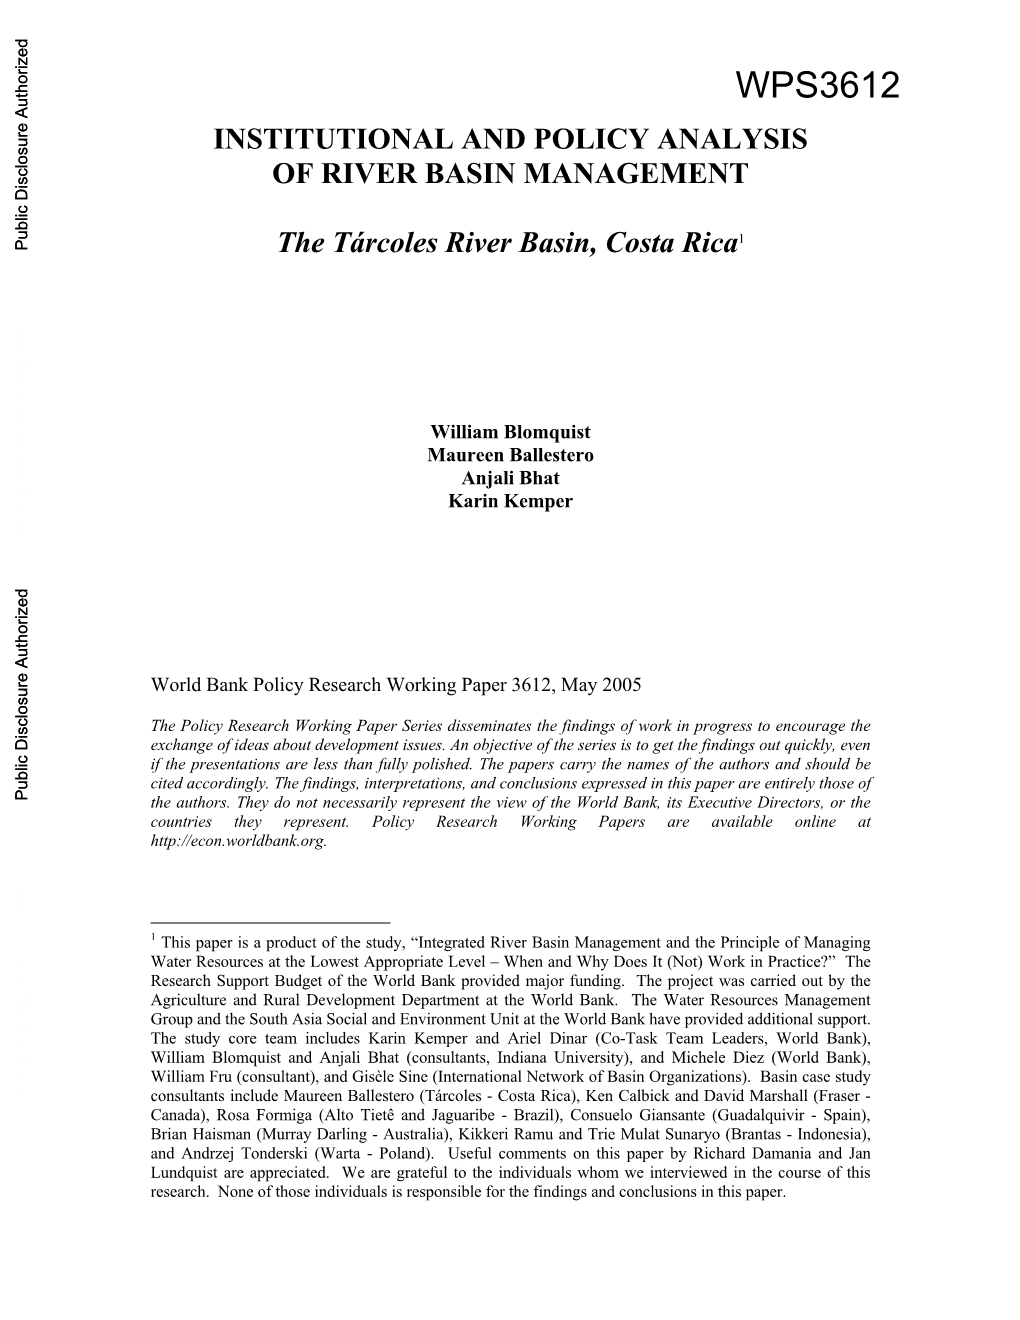 Wps3612 Institutional and Policy Analysis of River Basin Management